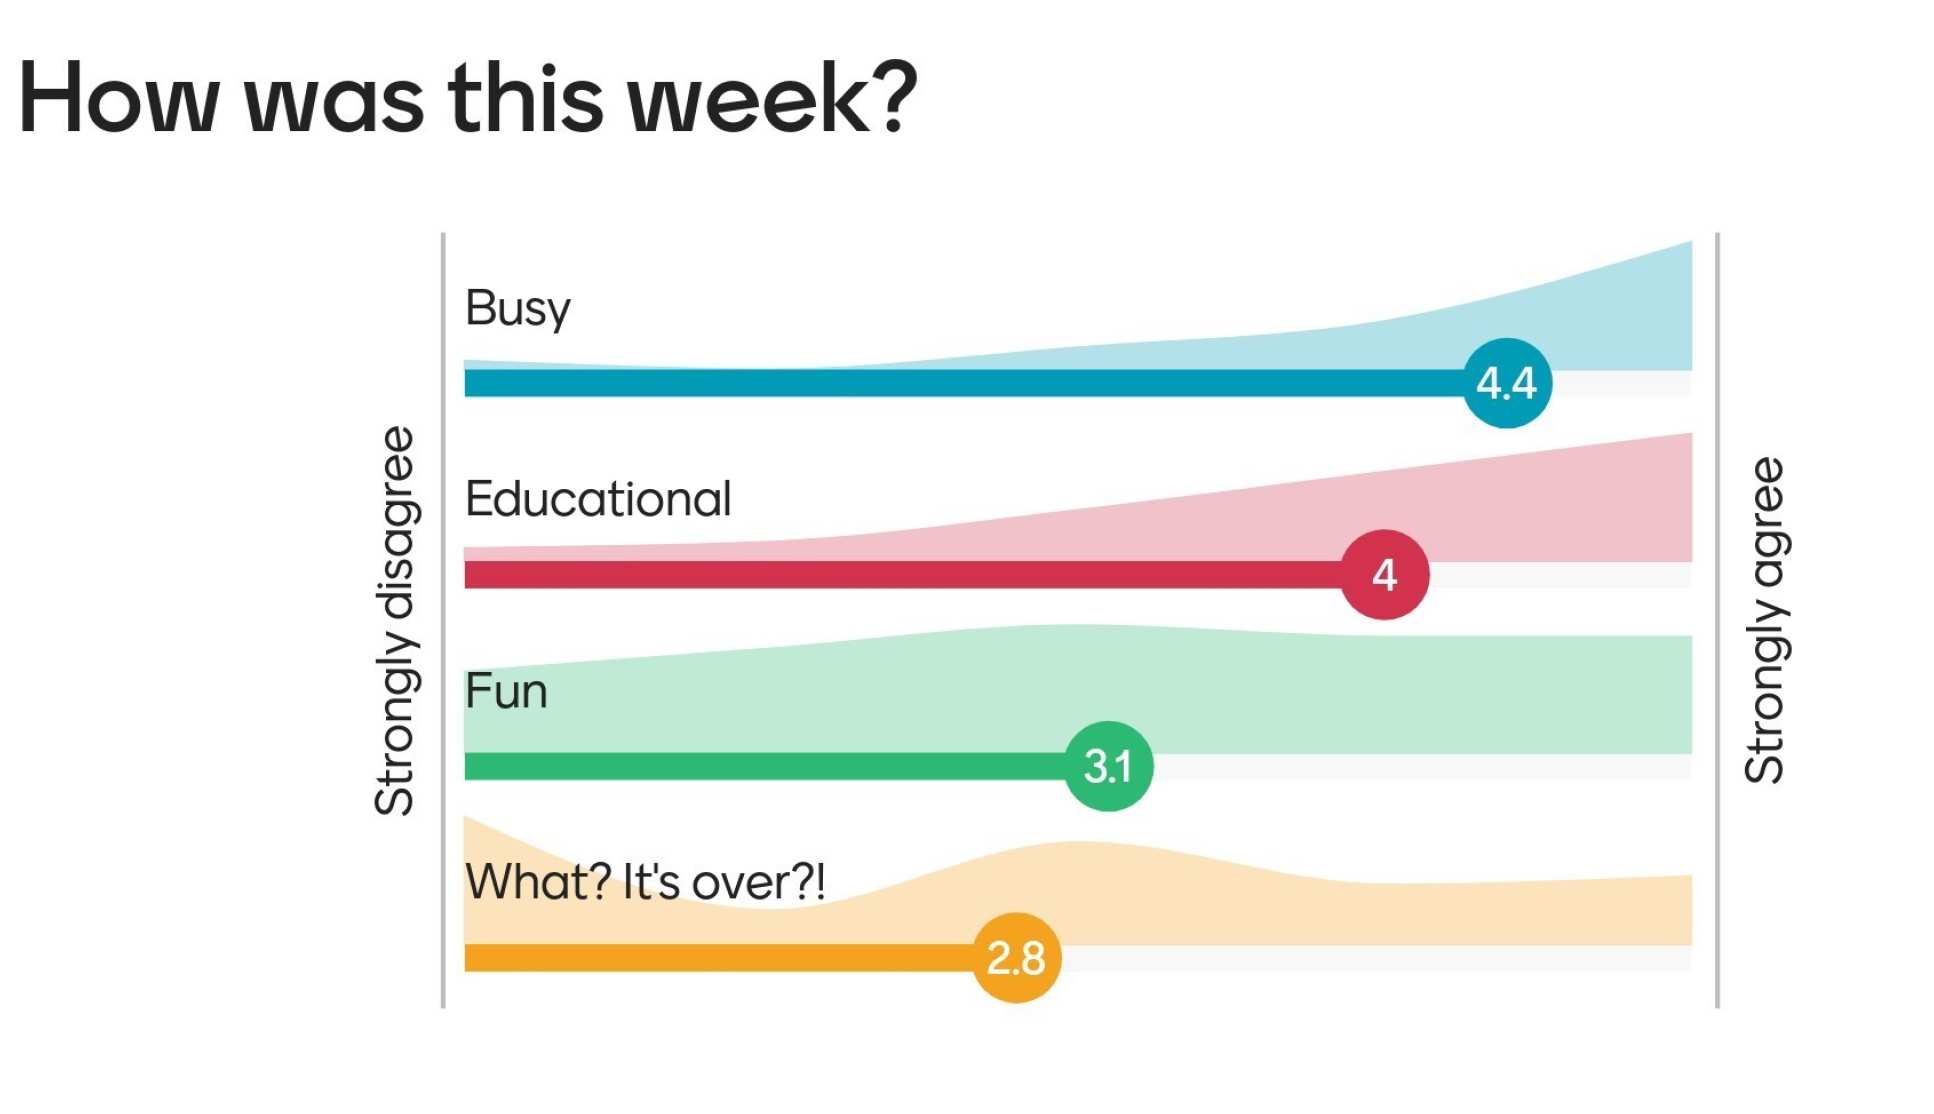 Image heading "How was this week" shows most students found it busy and educational